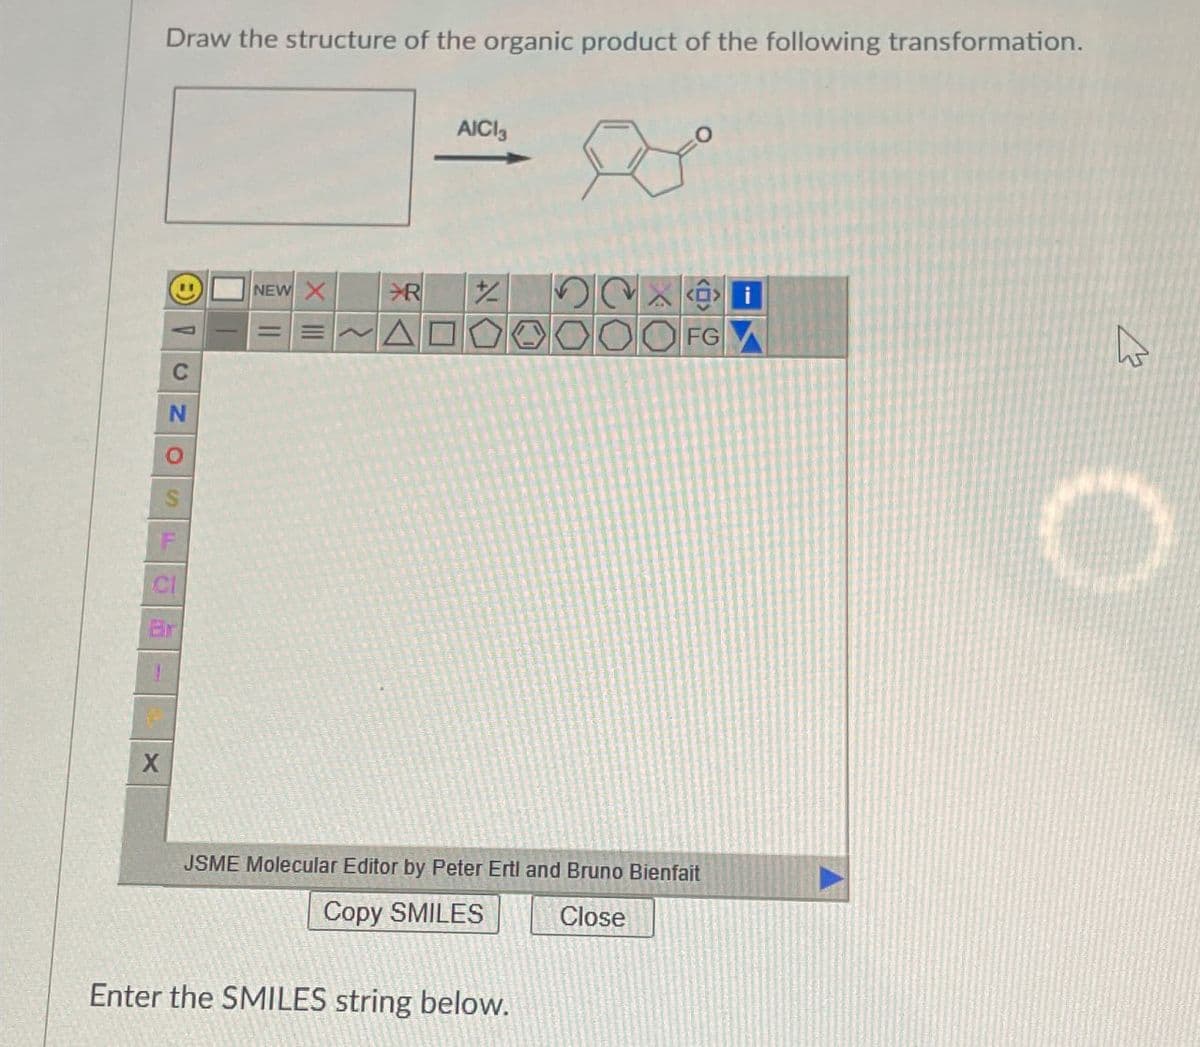 Draw the structure of the organic product of the following transformation.
CNO
Br
X
AICI 3
NEW
R
+
ΔΟ
<i
FG
JSME Molecular Editor by Peter Ertl and Bruno Bienfait
Copy SMILES
Enter the SMILES string below.
Close
W